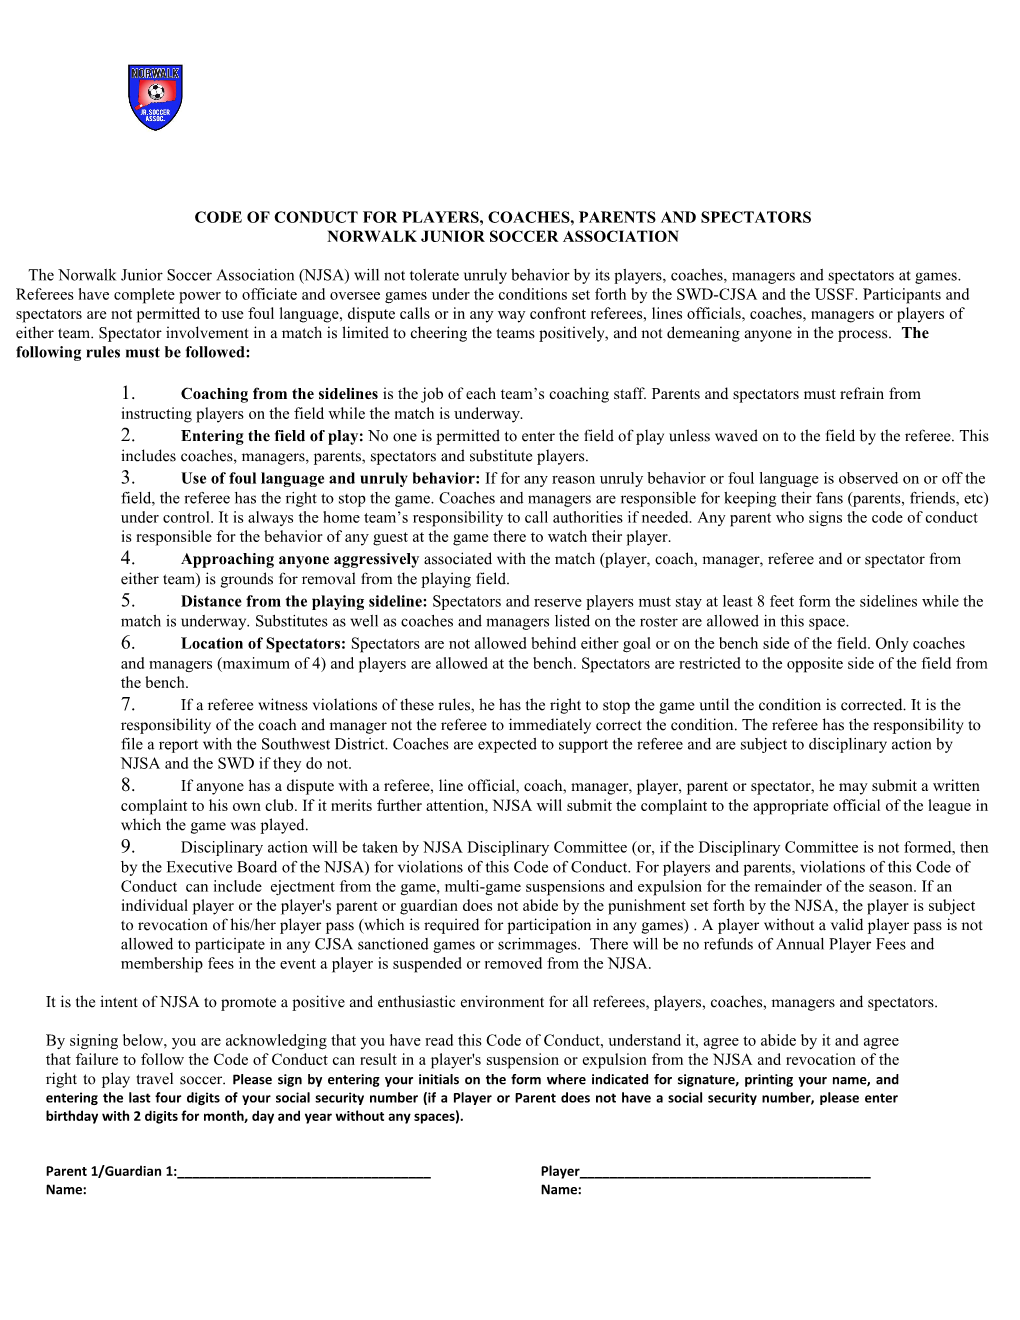 Code of Conduct Agreement for Players, Coaches, Parents and Spectators